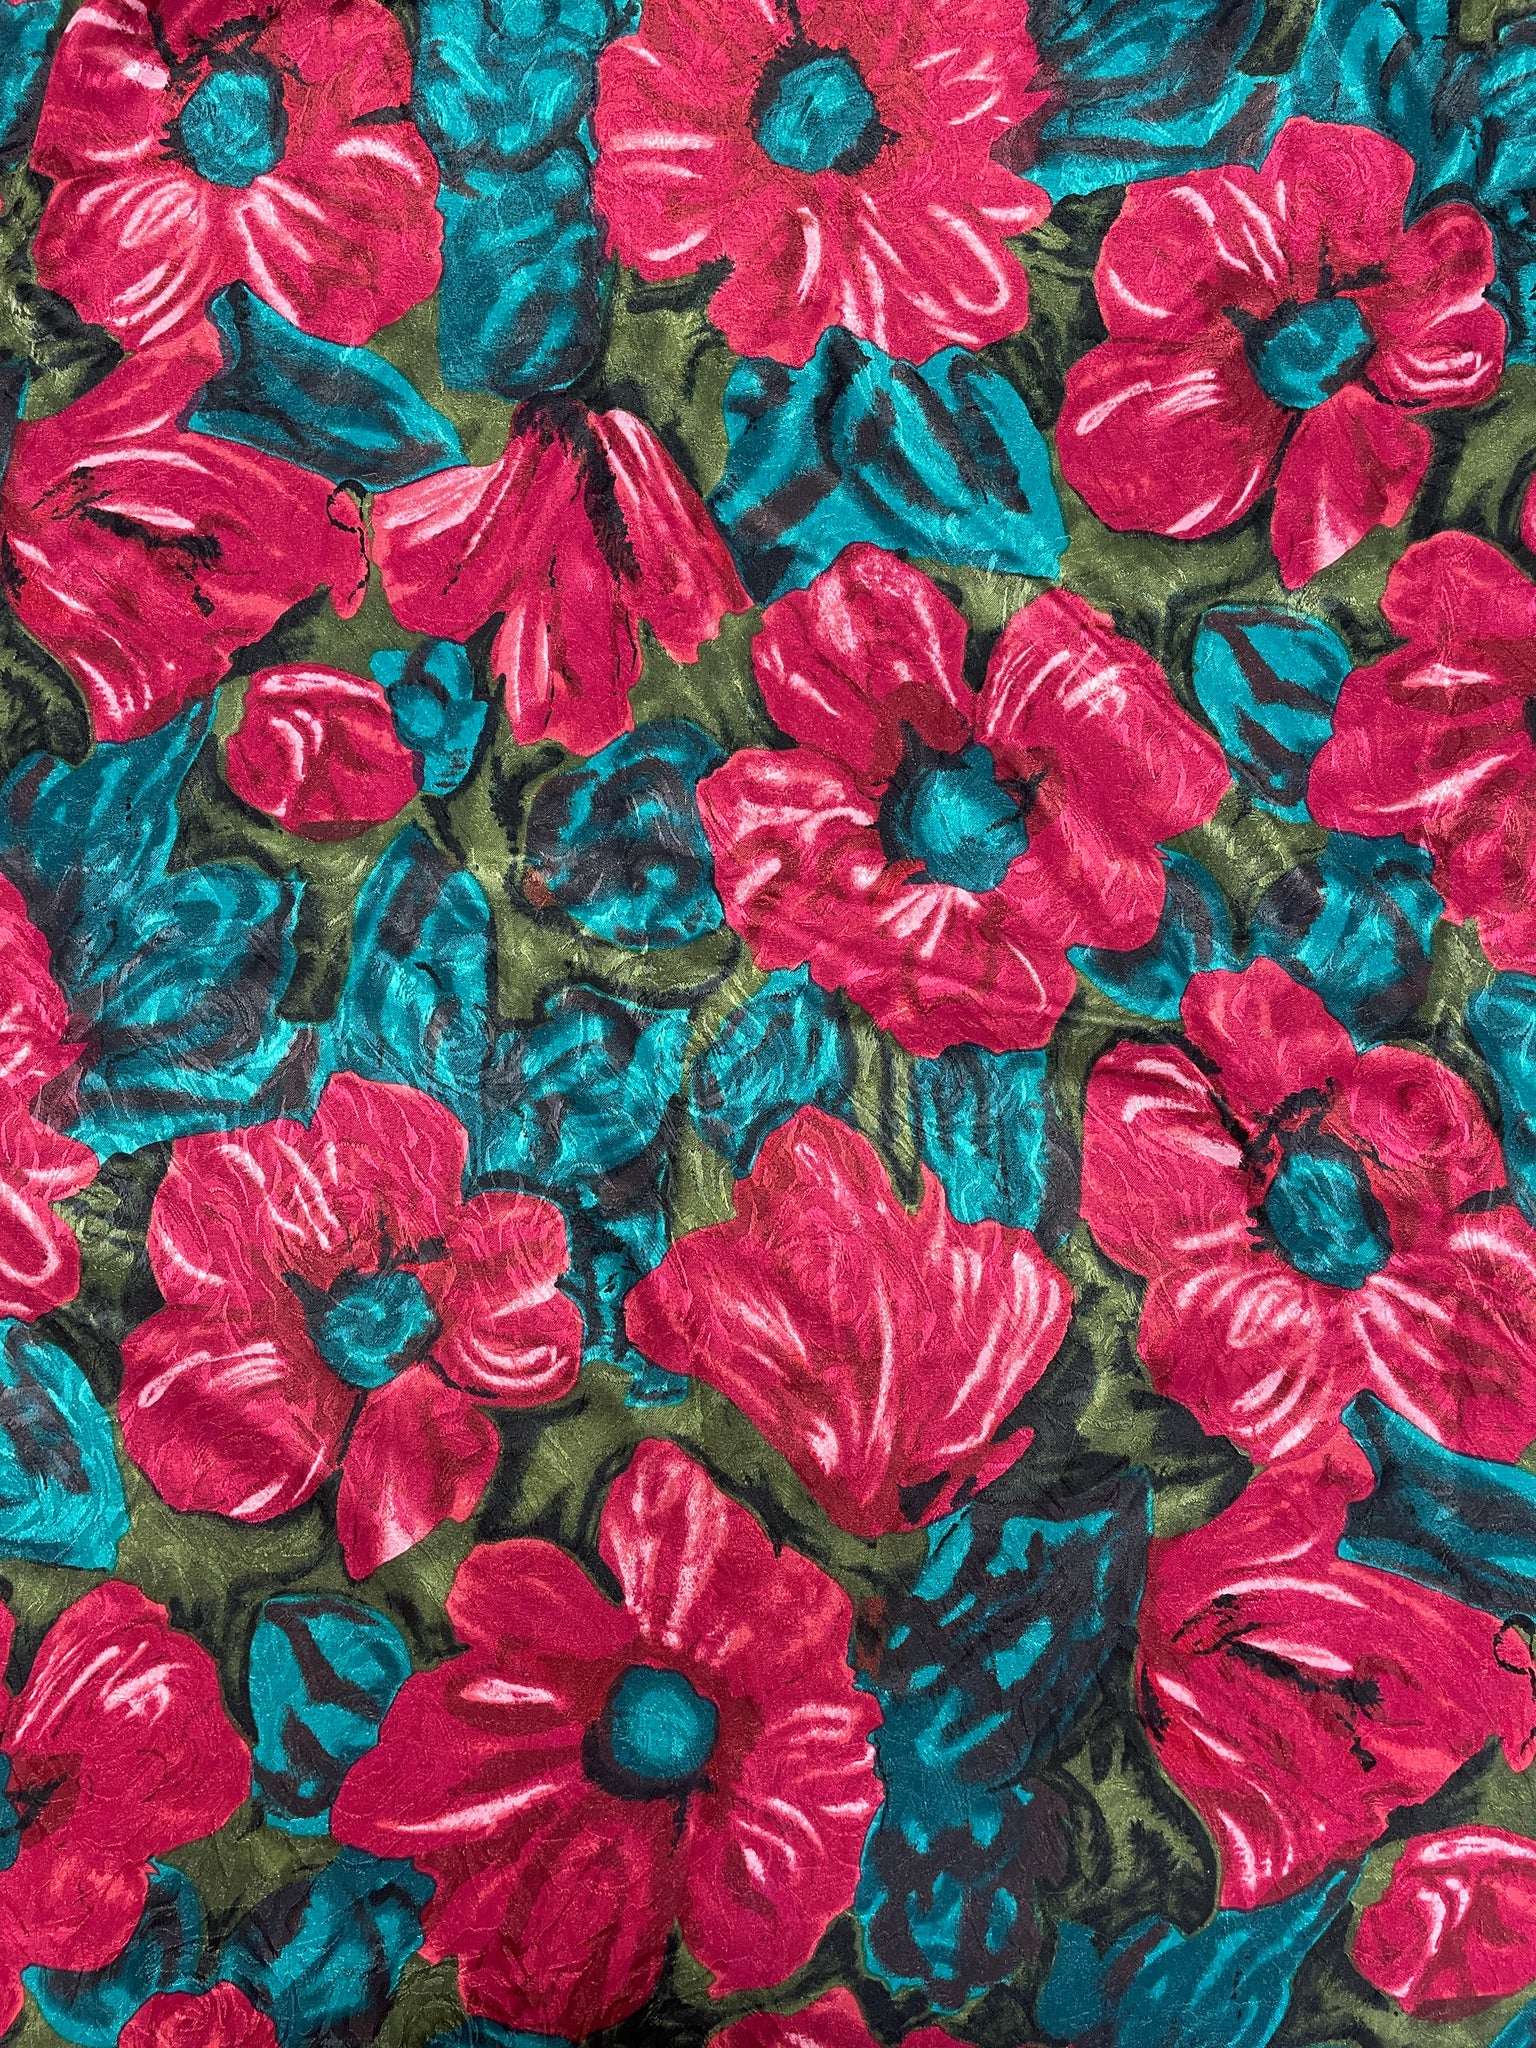 3 YD Polyester Printed Floral Jacquard Vintage - Red Flowers with Teal